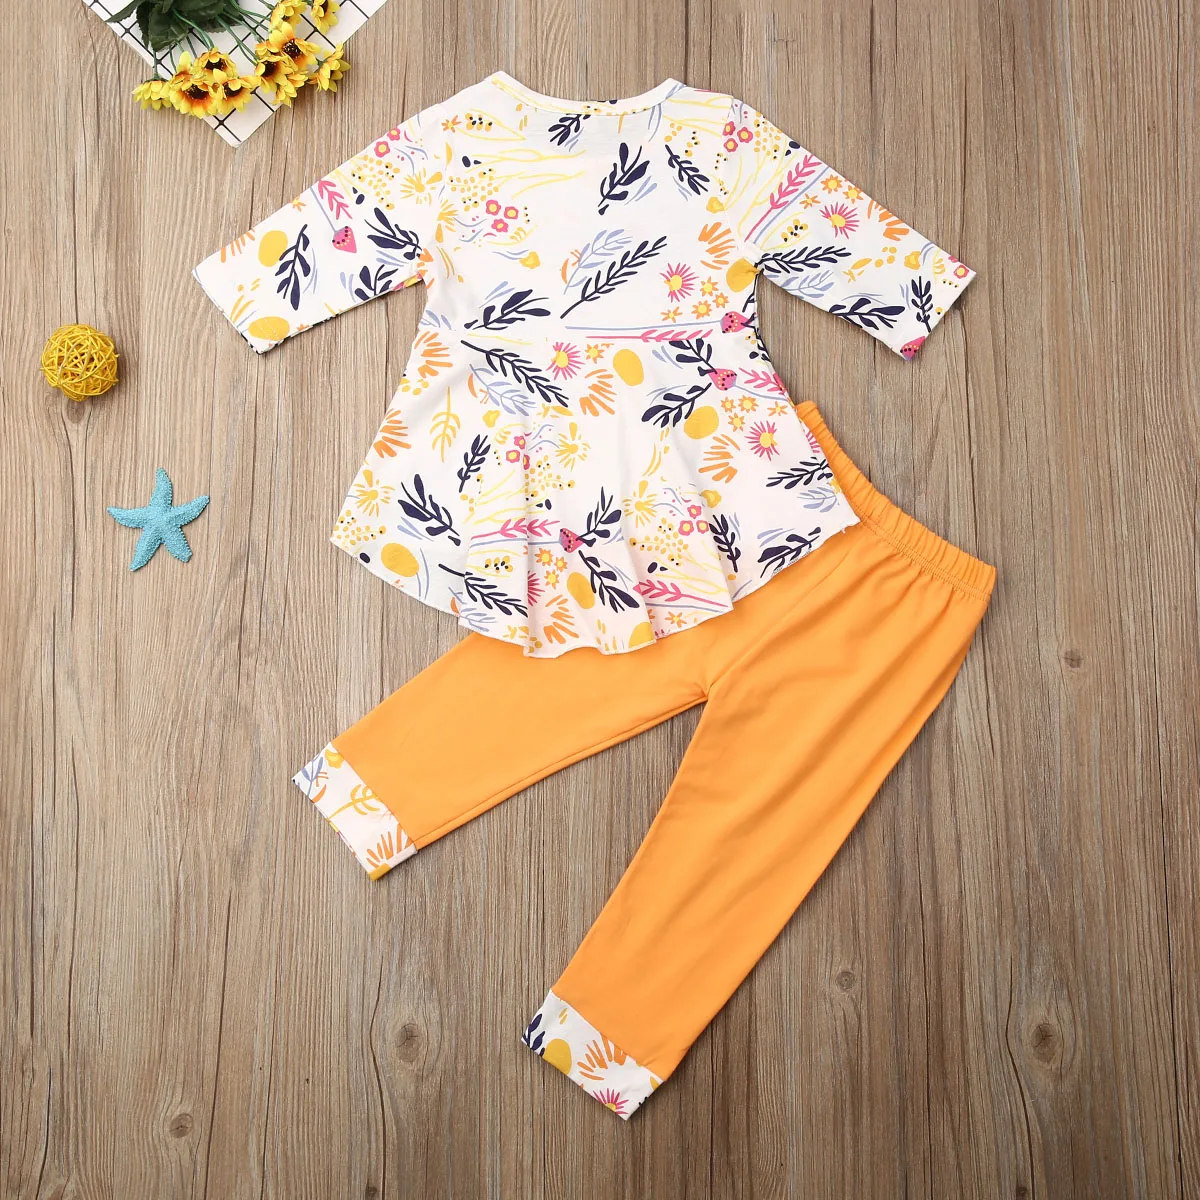 Pudcoco Autumn Toddler Baby Girl Clothes Long Sleeve Flower Print Ruffle Dress Tops Long Pants 2Pcs Outfits Cotton Clothes